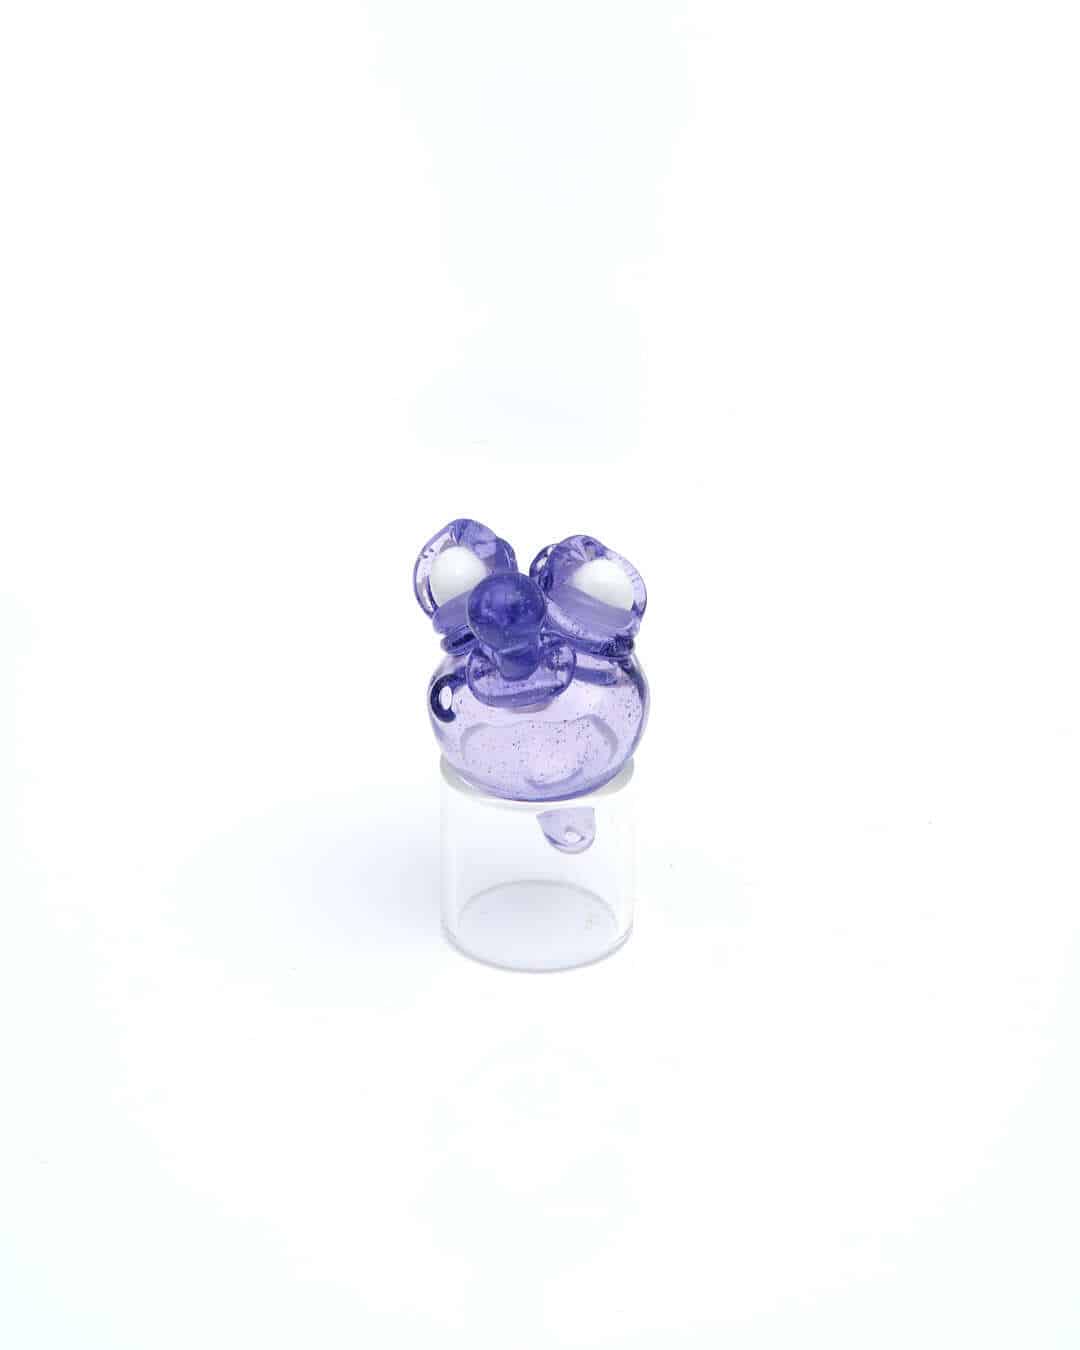 comfortable design of the Prince (Glass Alchemy) Carb Cap by FrostysFresh